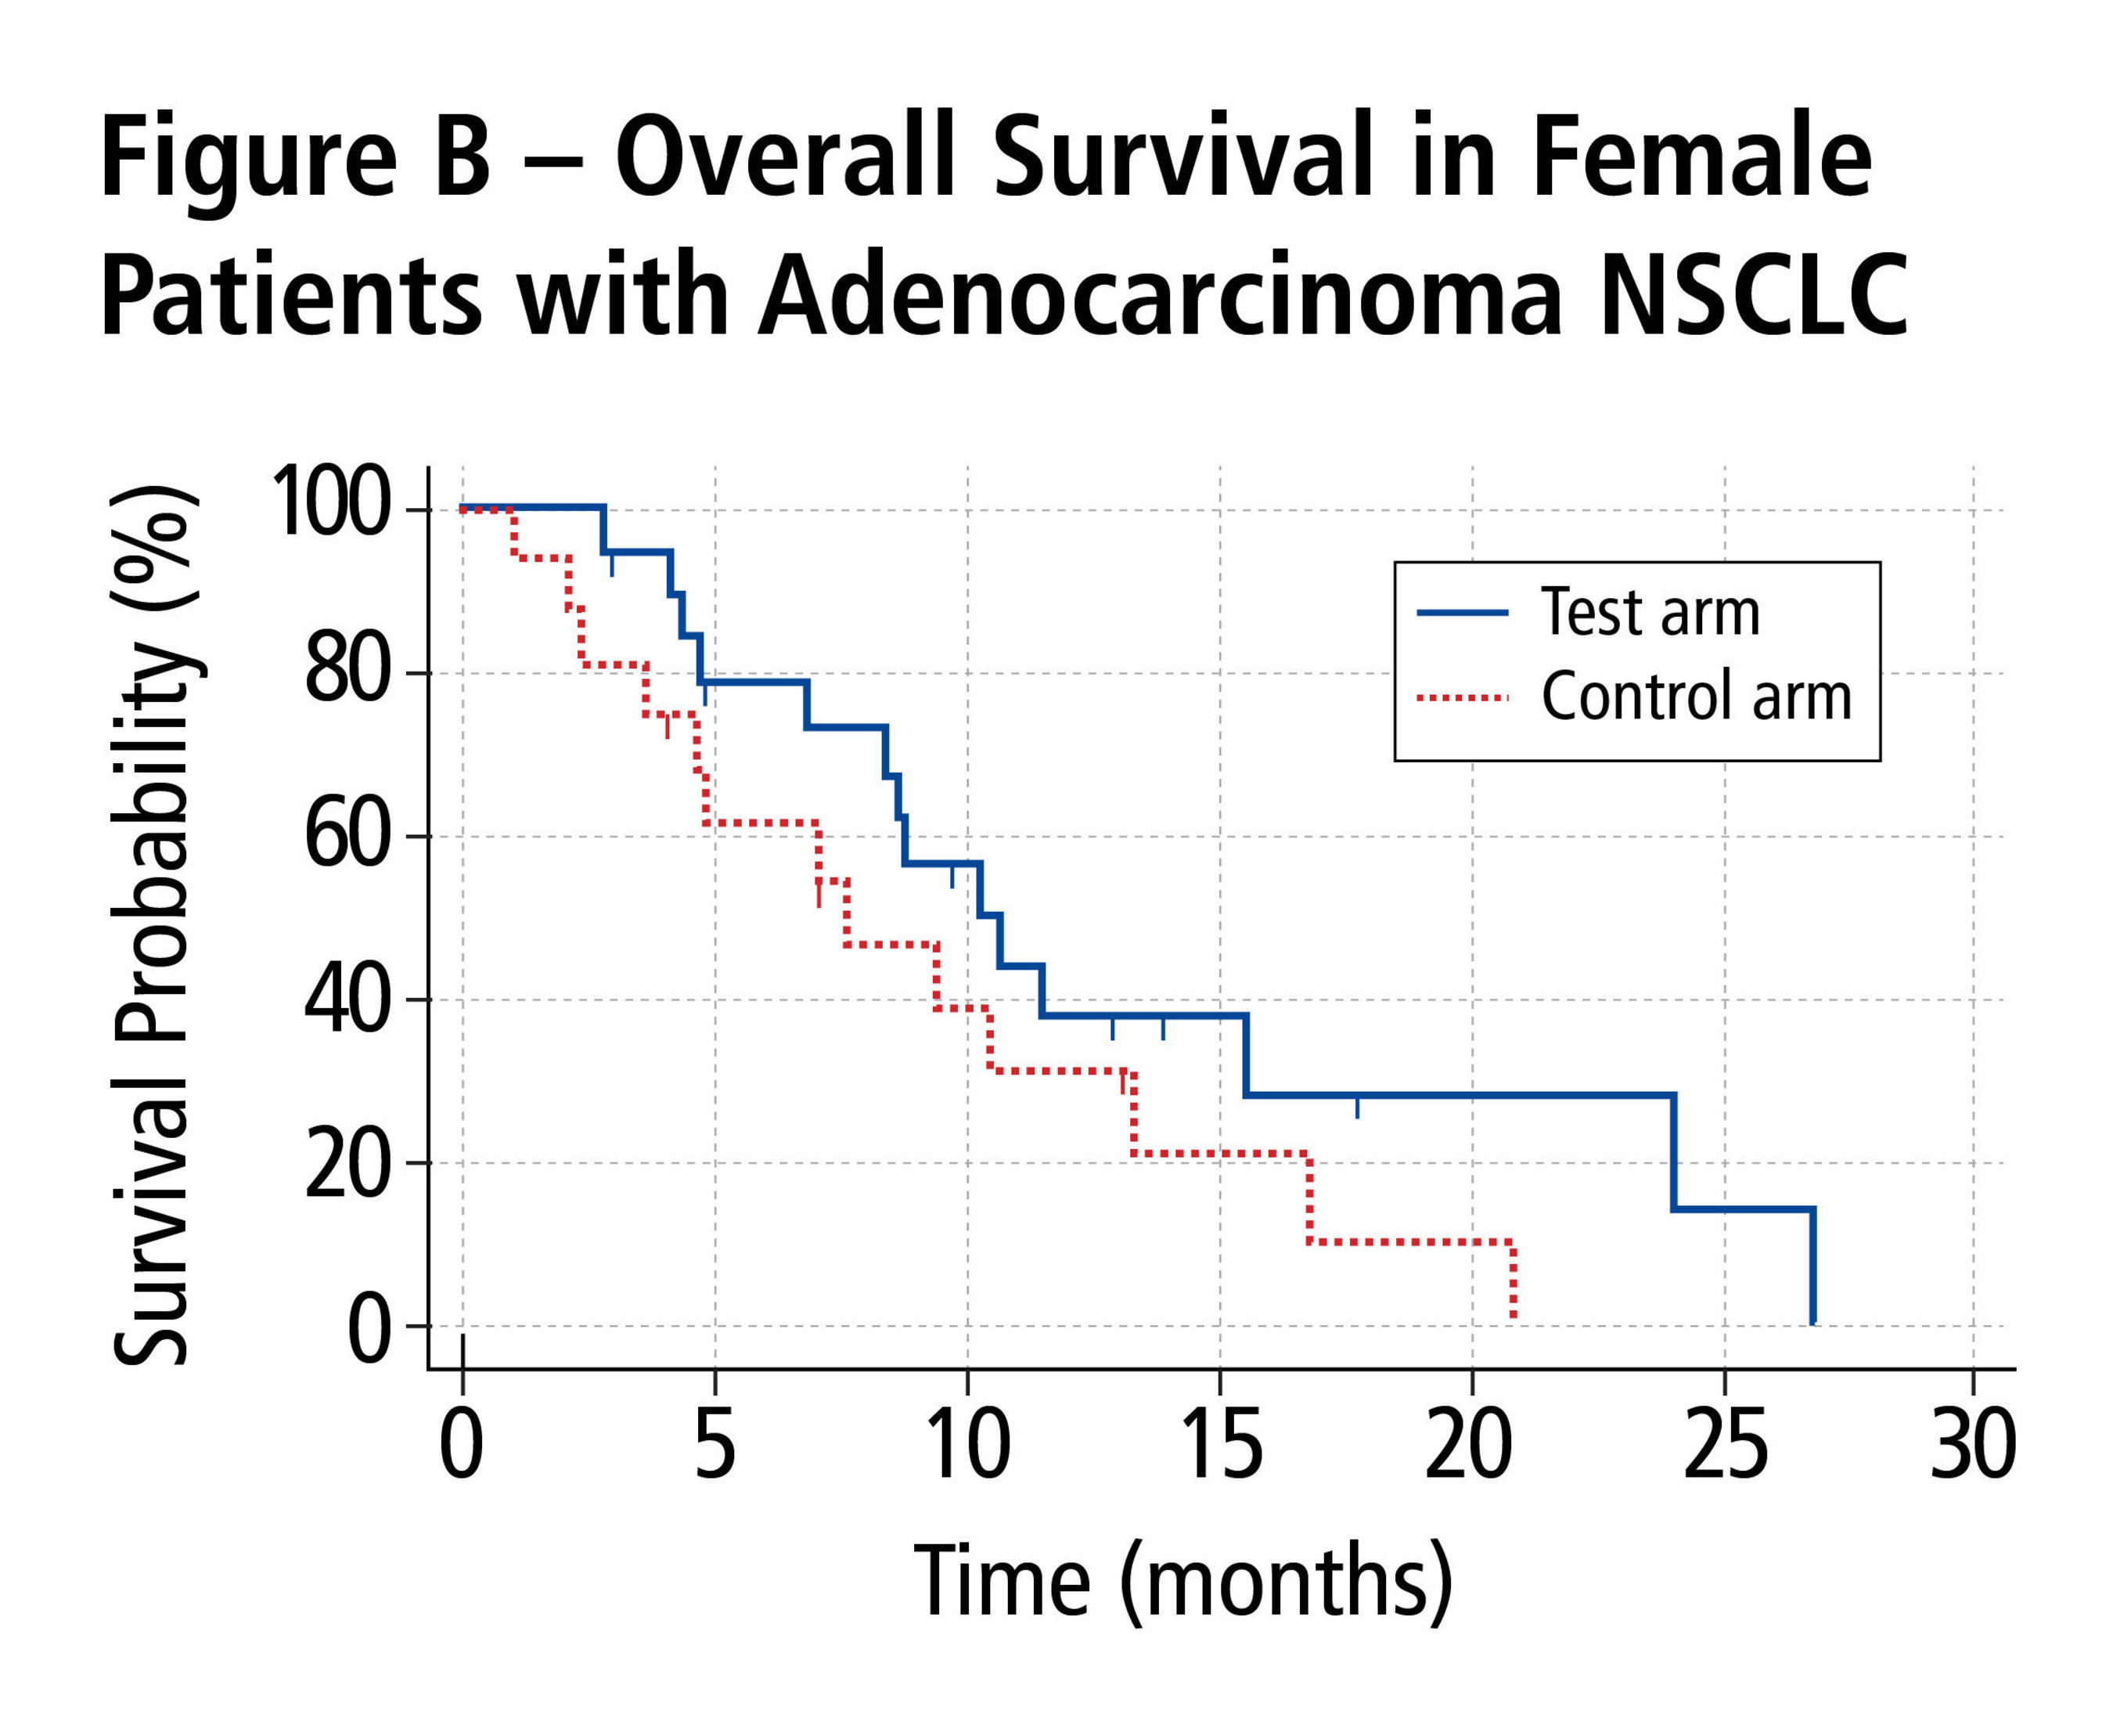 Figure B - Overall Survival in Female Patients with Adenocarcinoma NSCLC